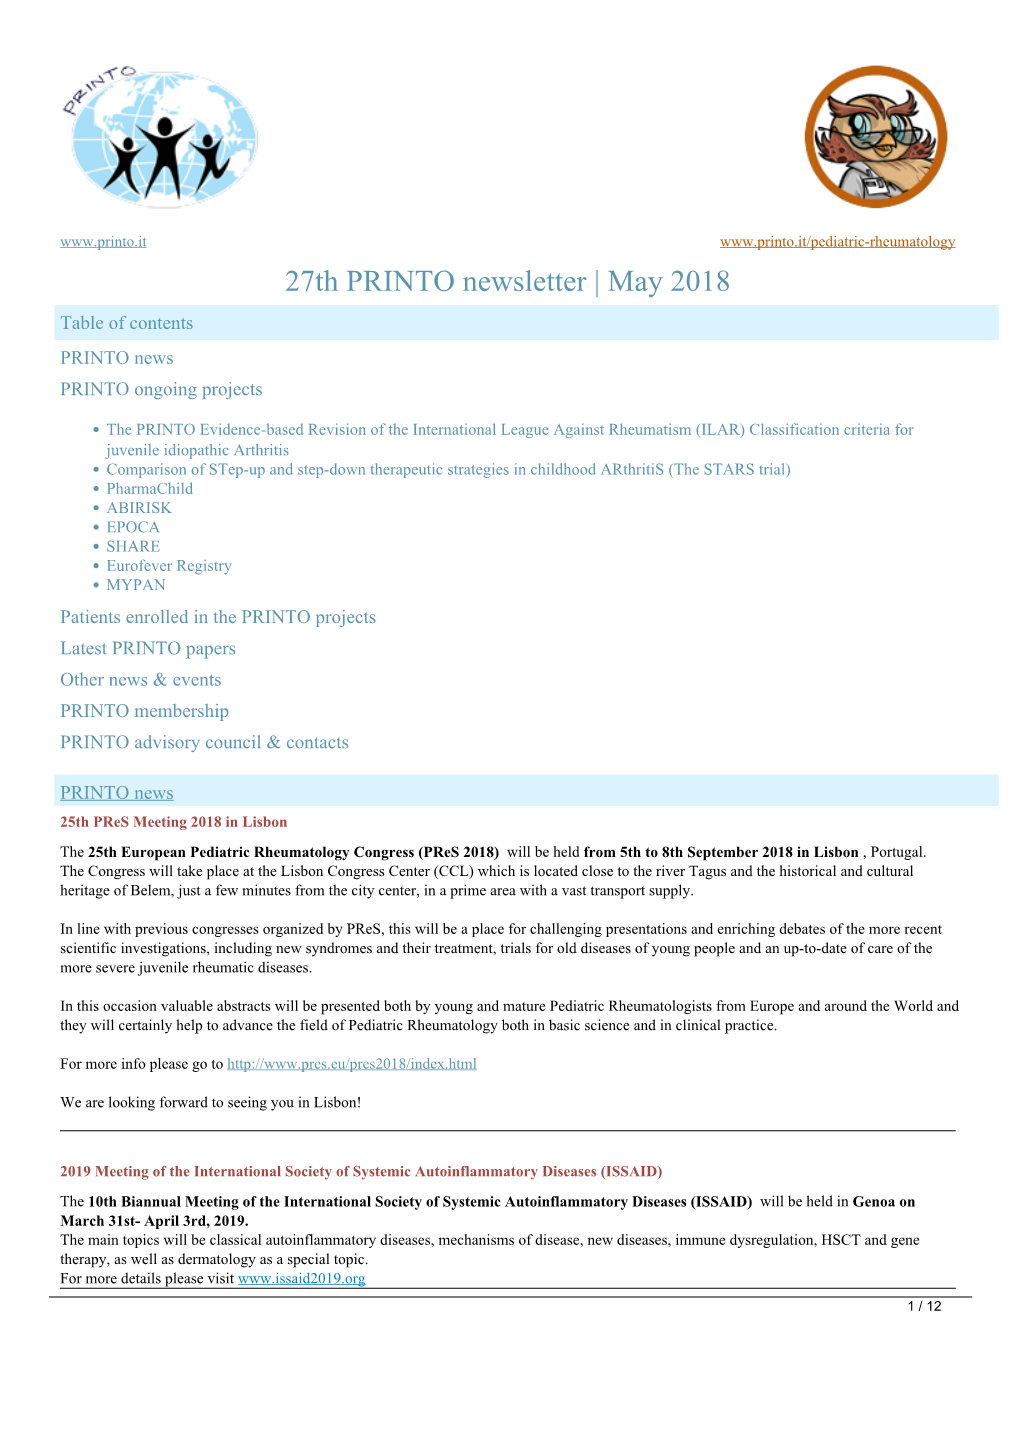 27Th PRINTO Newsletter | May 2018 Table of Contents PRINTO News PRINTO Ongoing Projects